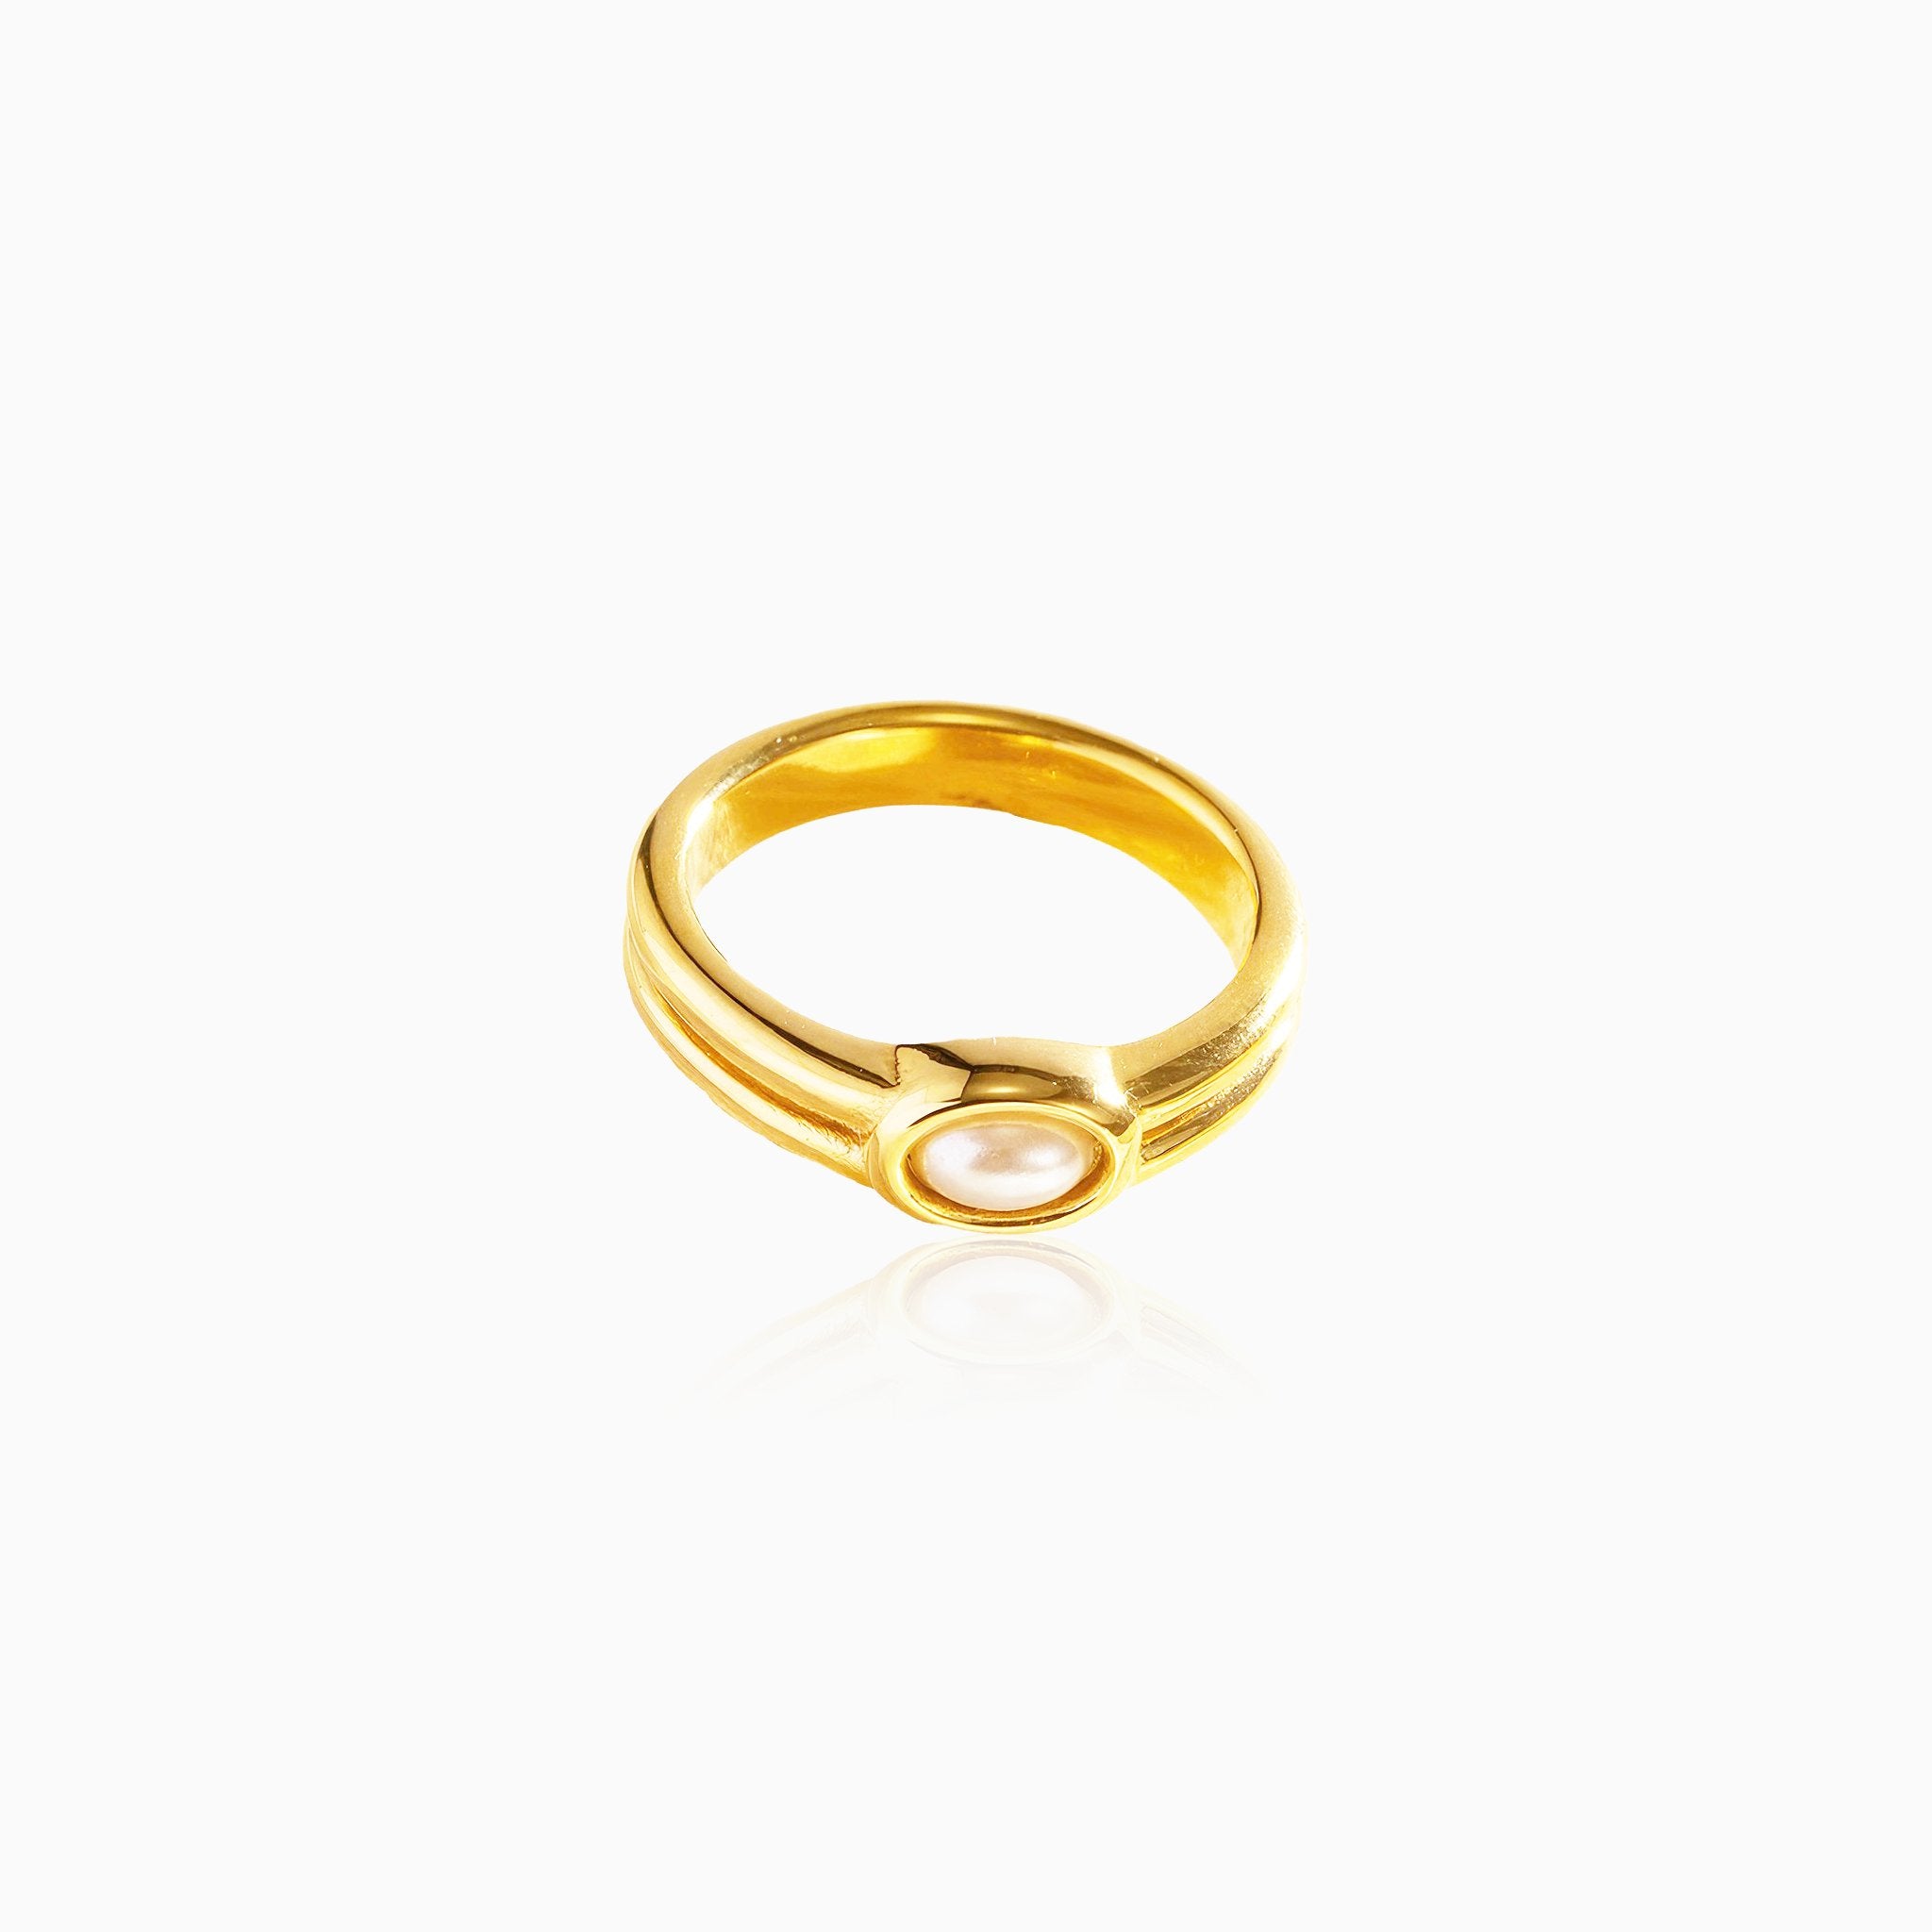 Pearl-Inlaid Geometric Ring - Nobbier - Ring - 18K Gold And Titanium PVD Coated Jewelry